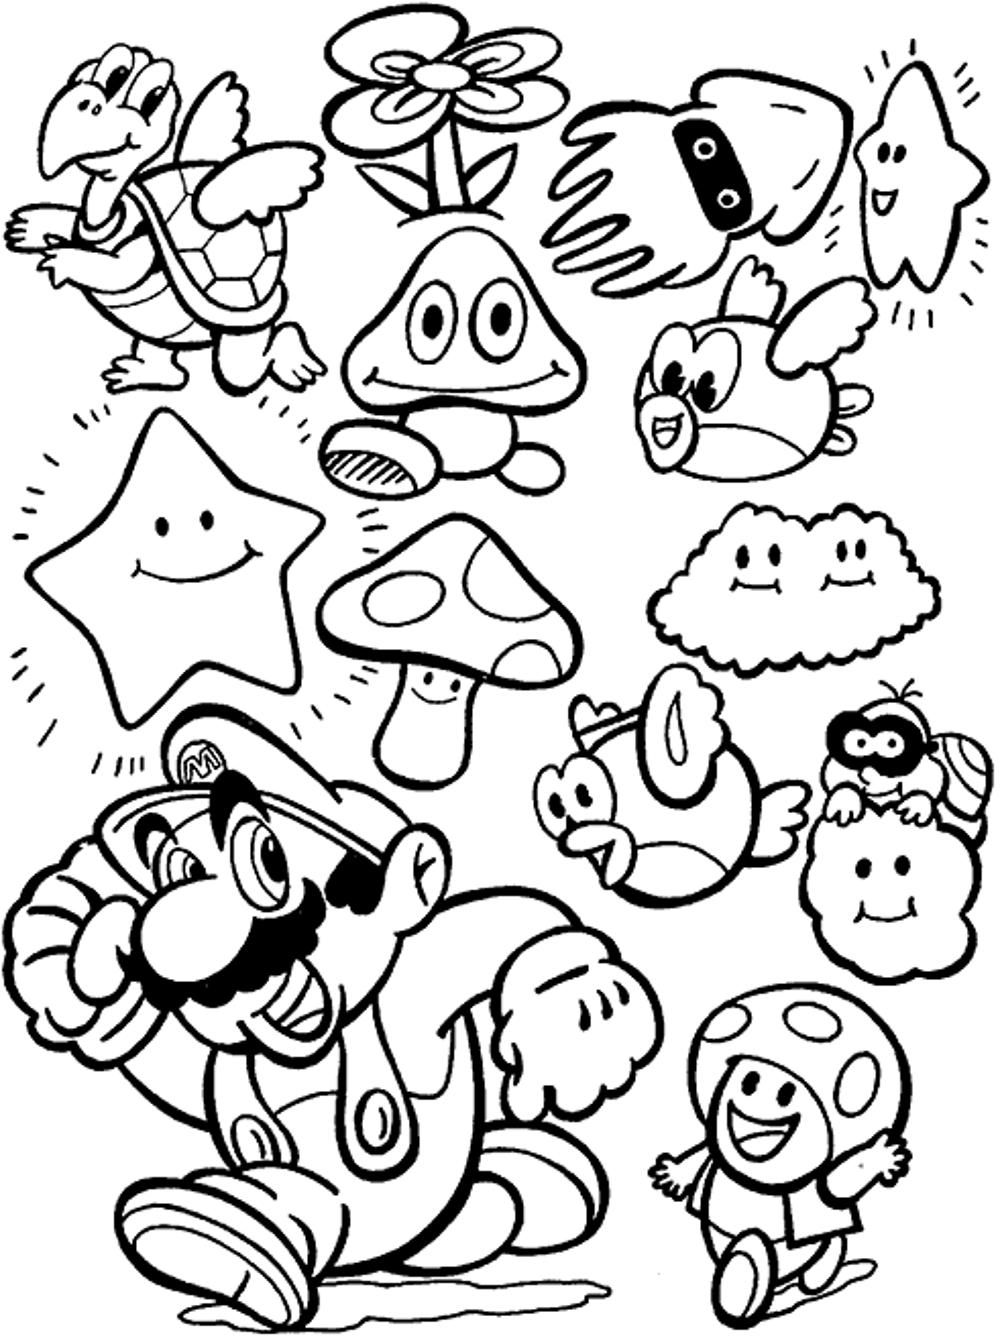 Mario Bros Characters Coloring Pages To Print - High Quality ...